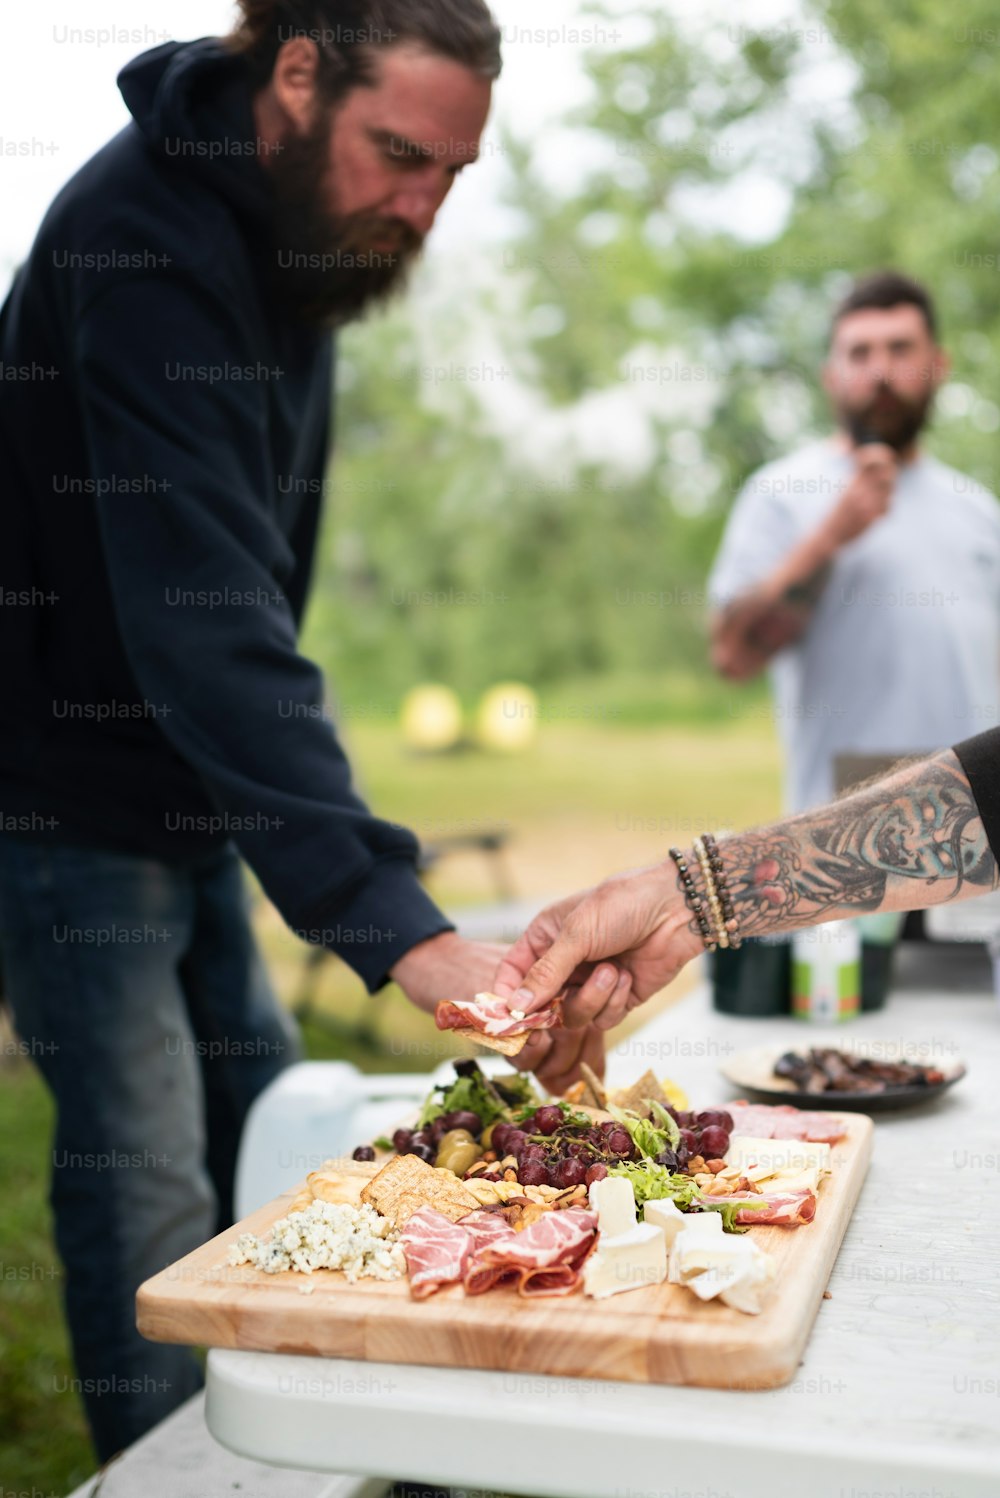 a man cutting up a salad on top of a wooden cutting board